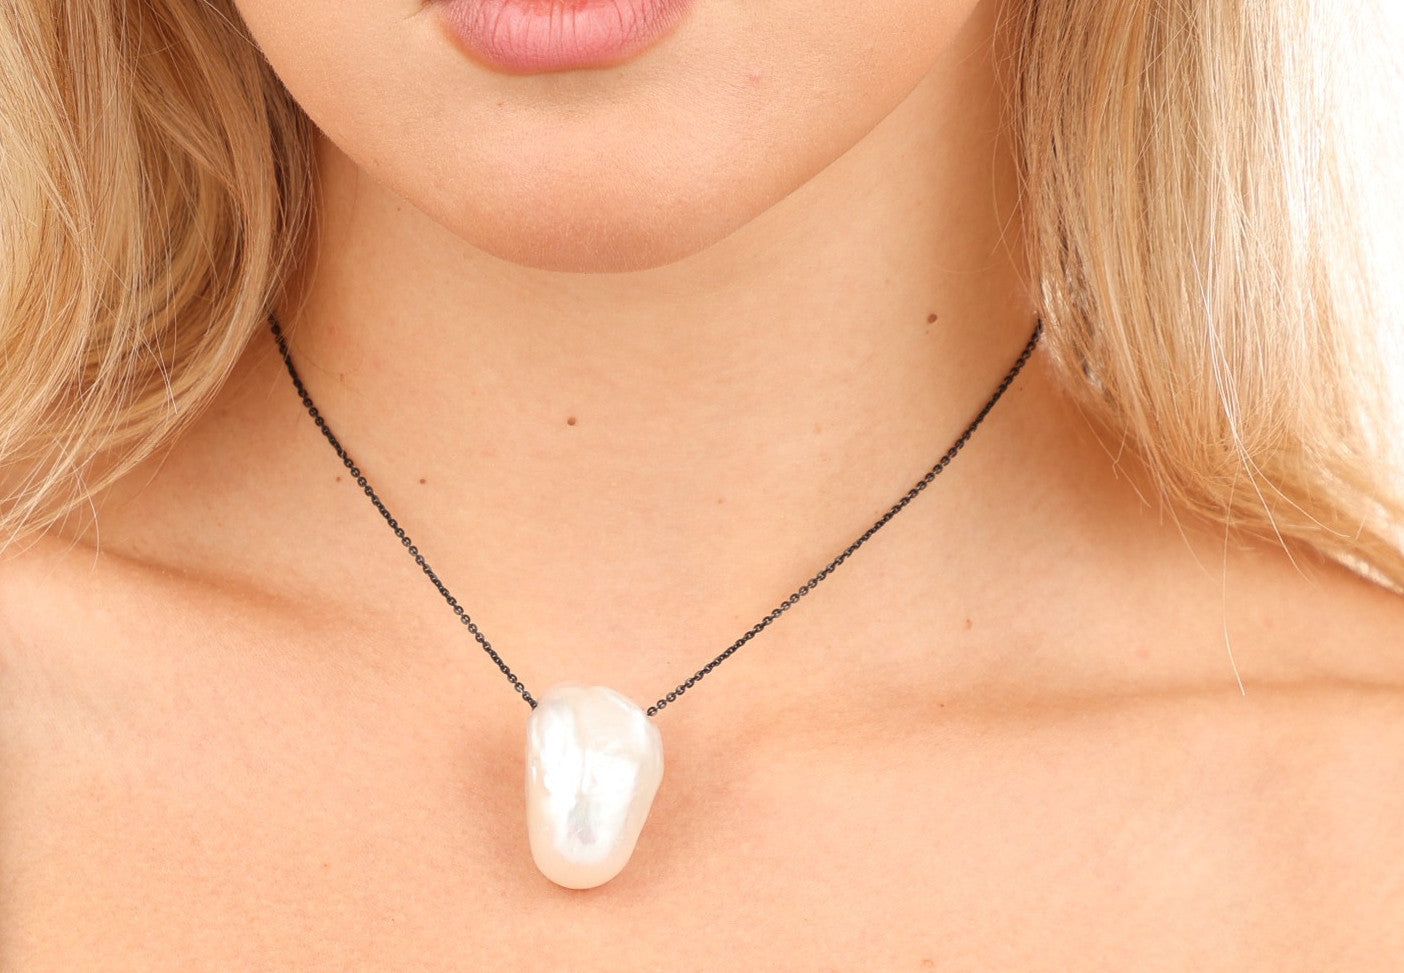 Elegant pearl necklace showcasing a lustrous freshwater pearl pendant on a sleek black chain.